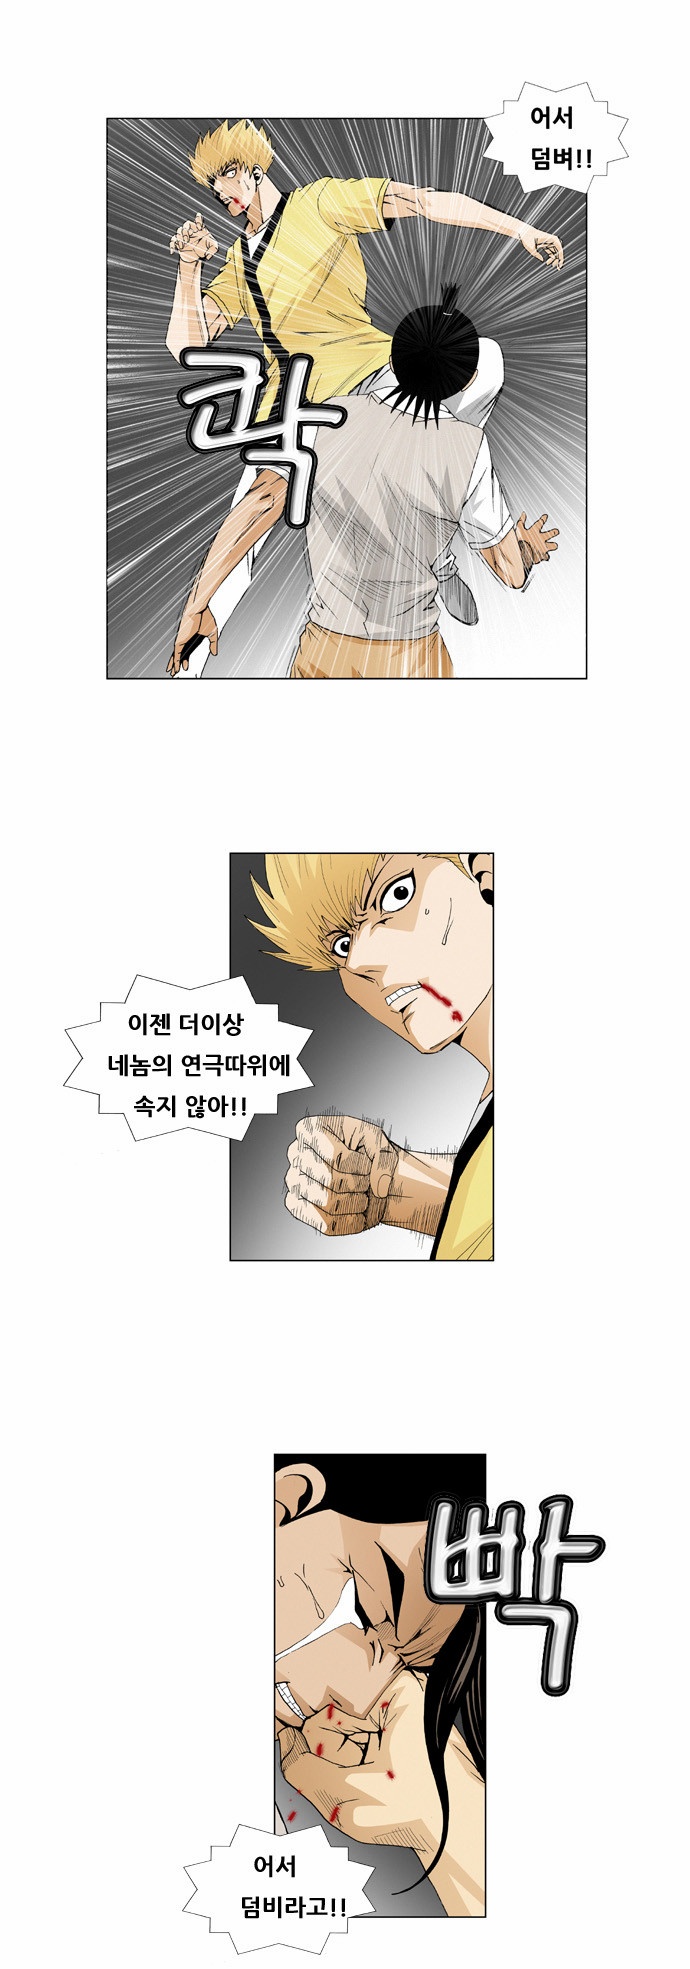 Ultimate Legend - Kang Hae Hyo - Chapter 38 - Page 4